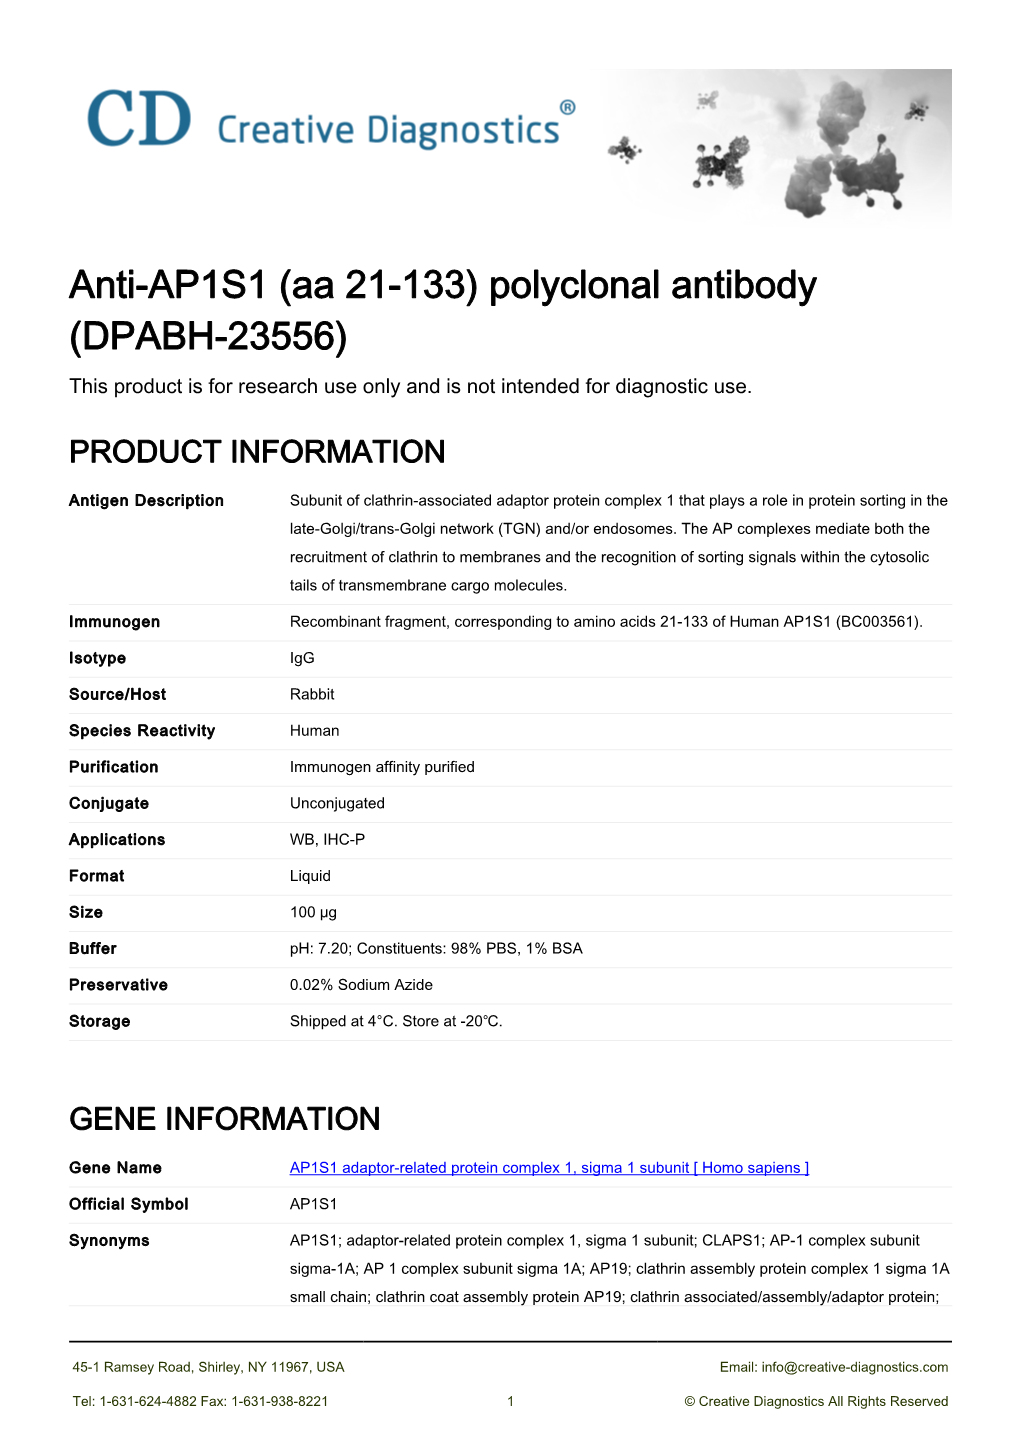 Anti-AP1S1 (Aa 21-133) Polyclonal Antibody (DPABH-23556) This Product Is for Research Use Only and Is Not Intended for Diagnostic Use